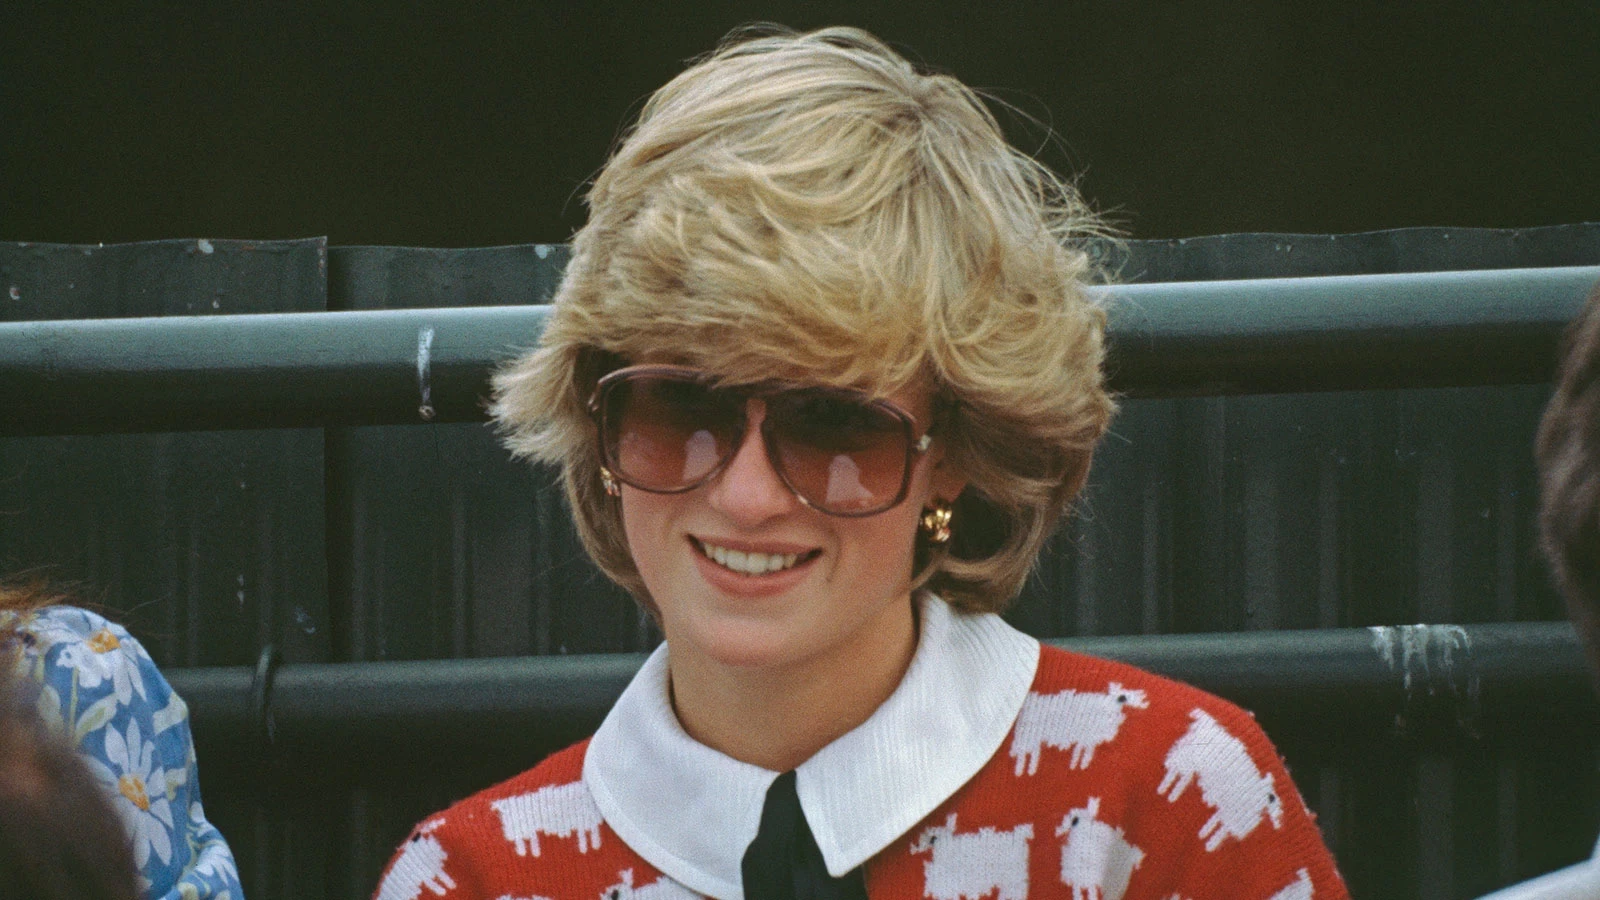 Princess Diana Archive / Getty Images